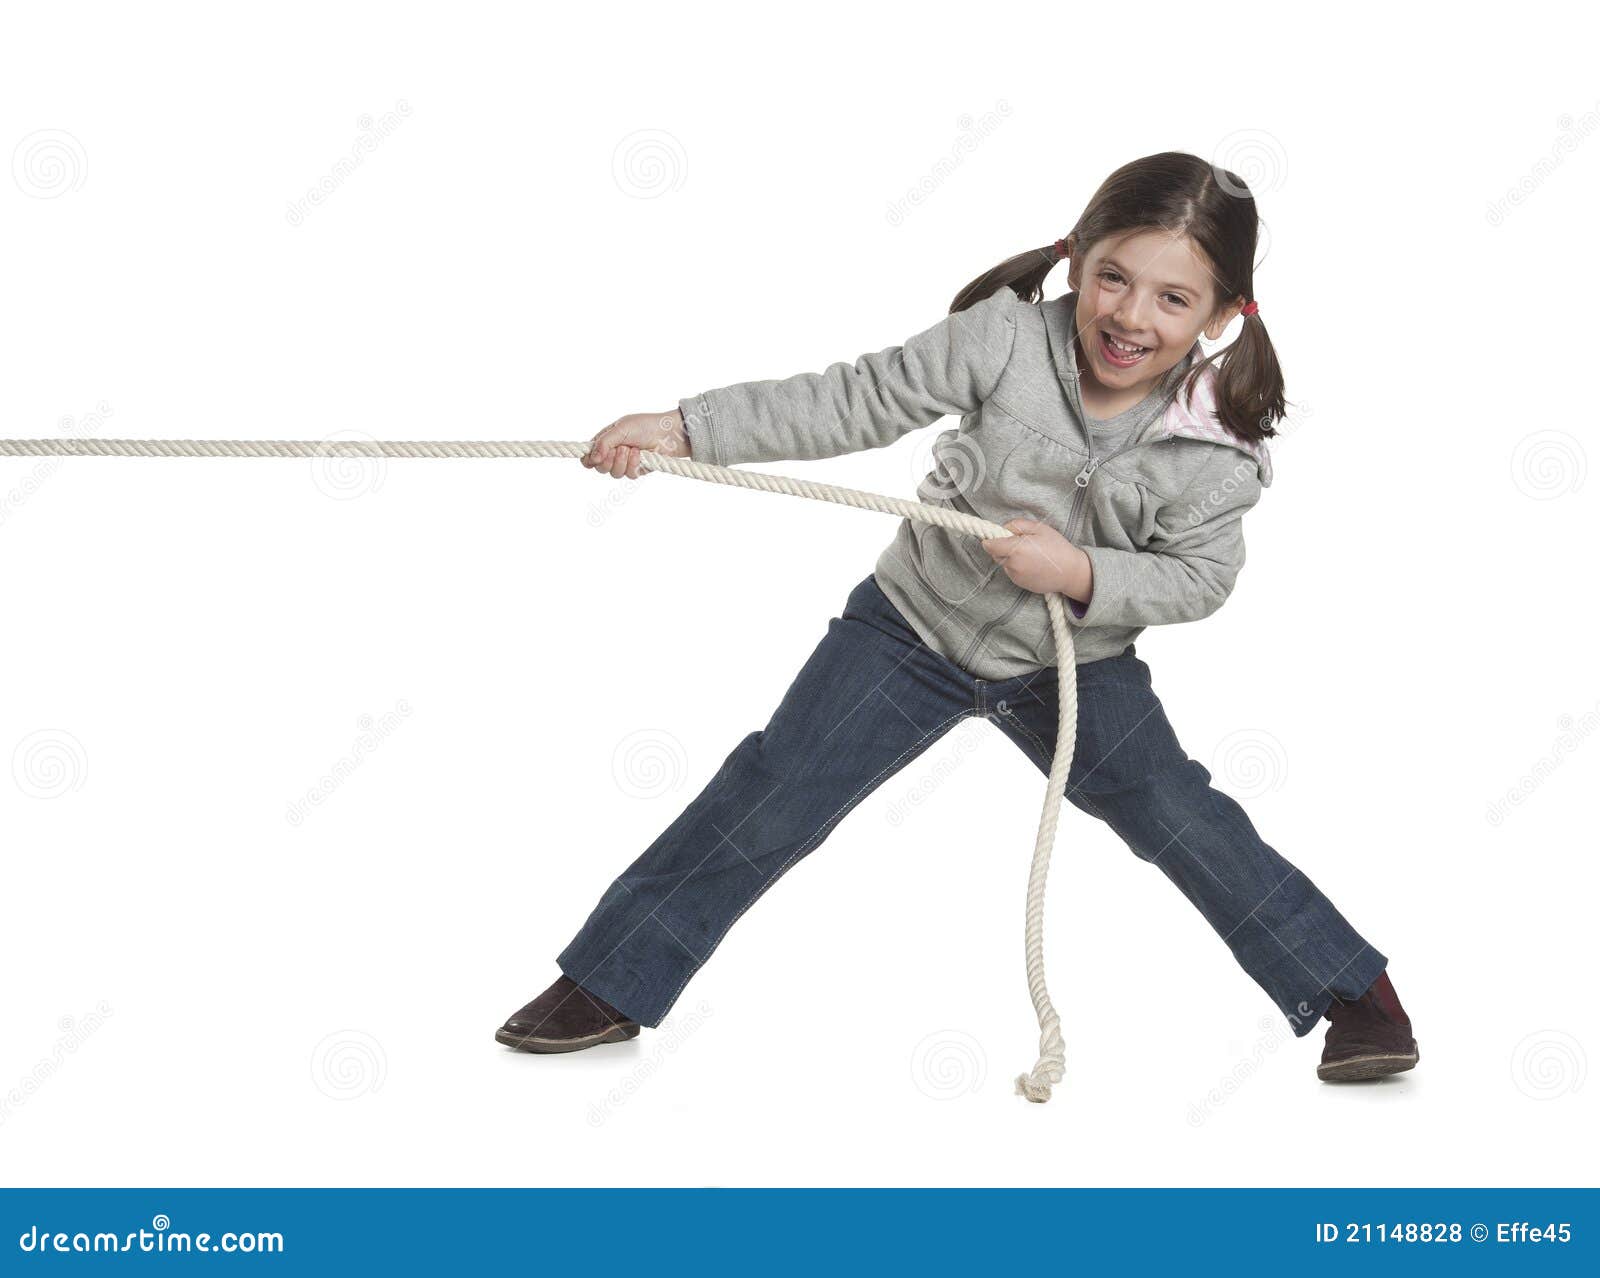 553 Kid Pulling Rope Stock Photos - Free & Royalty-Free Stock